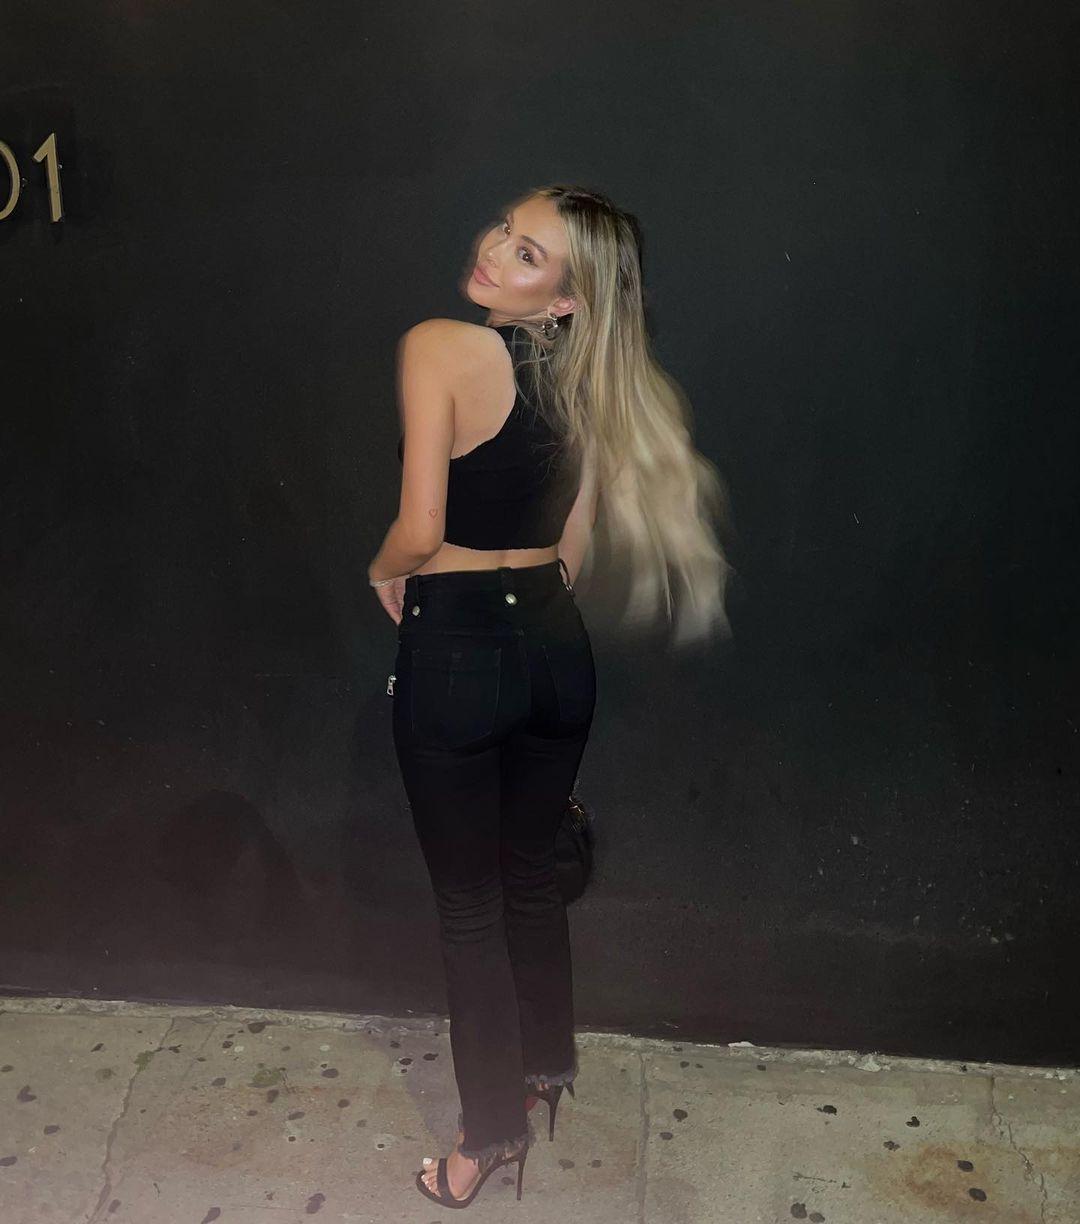 Corinne Olympios Shows Off Body In Tight Jeans: 'Born To Ride'